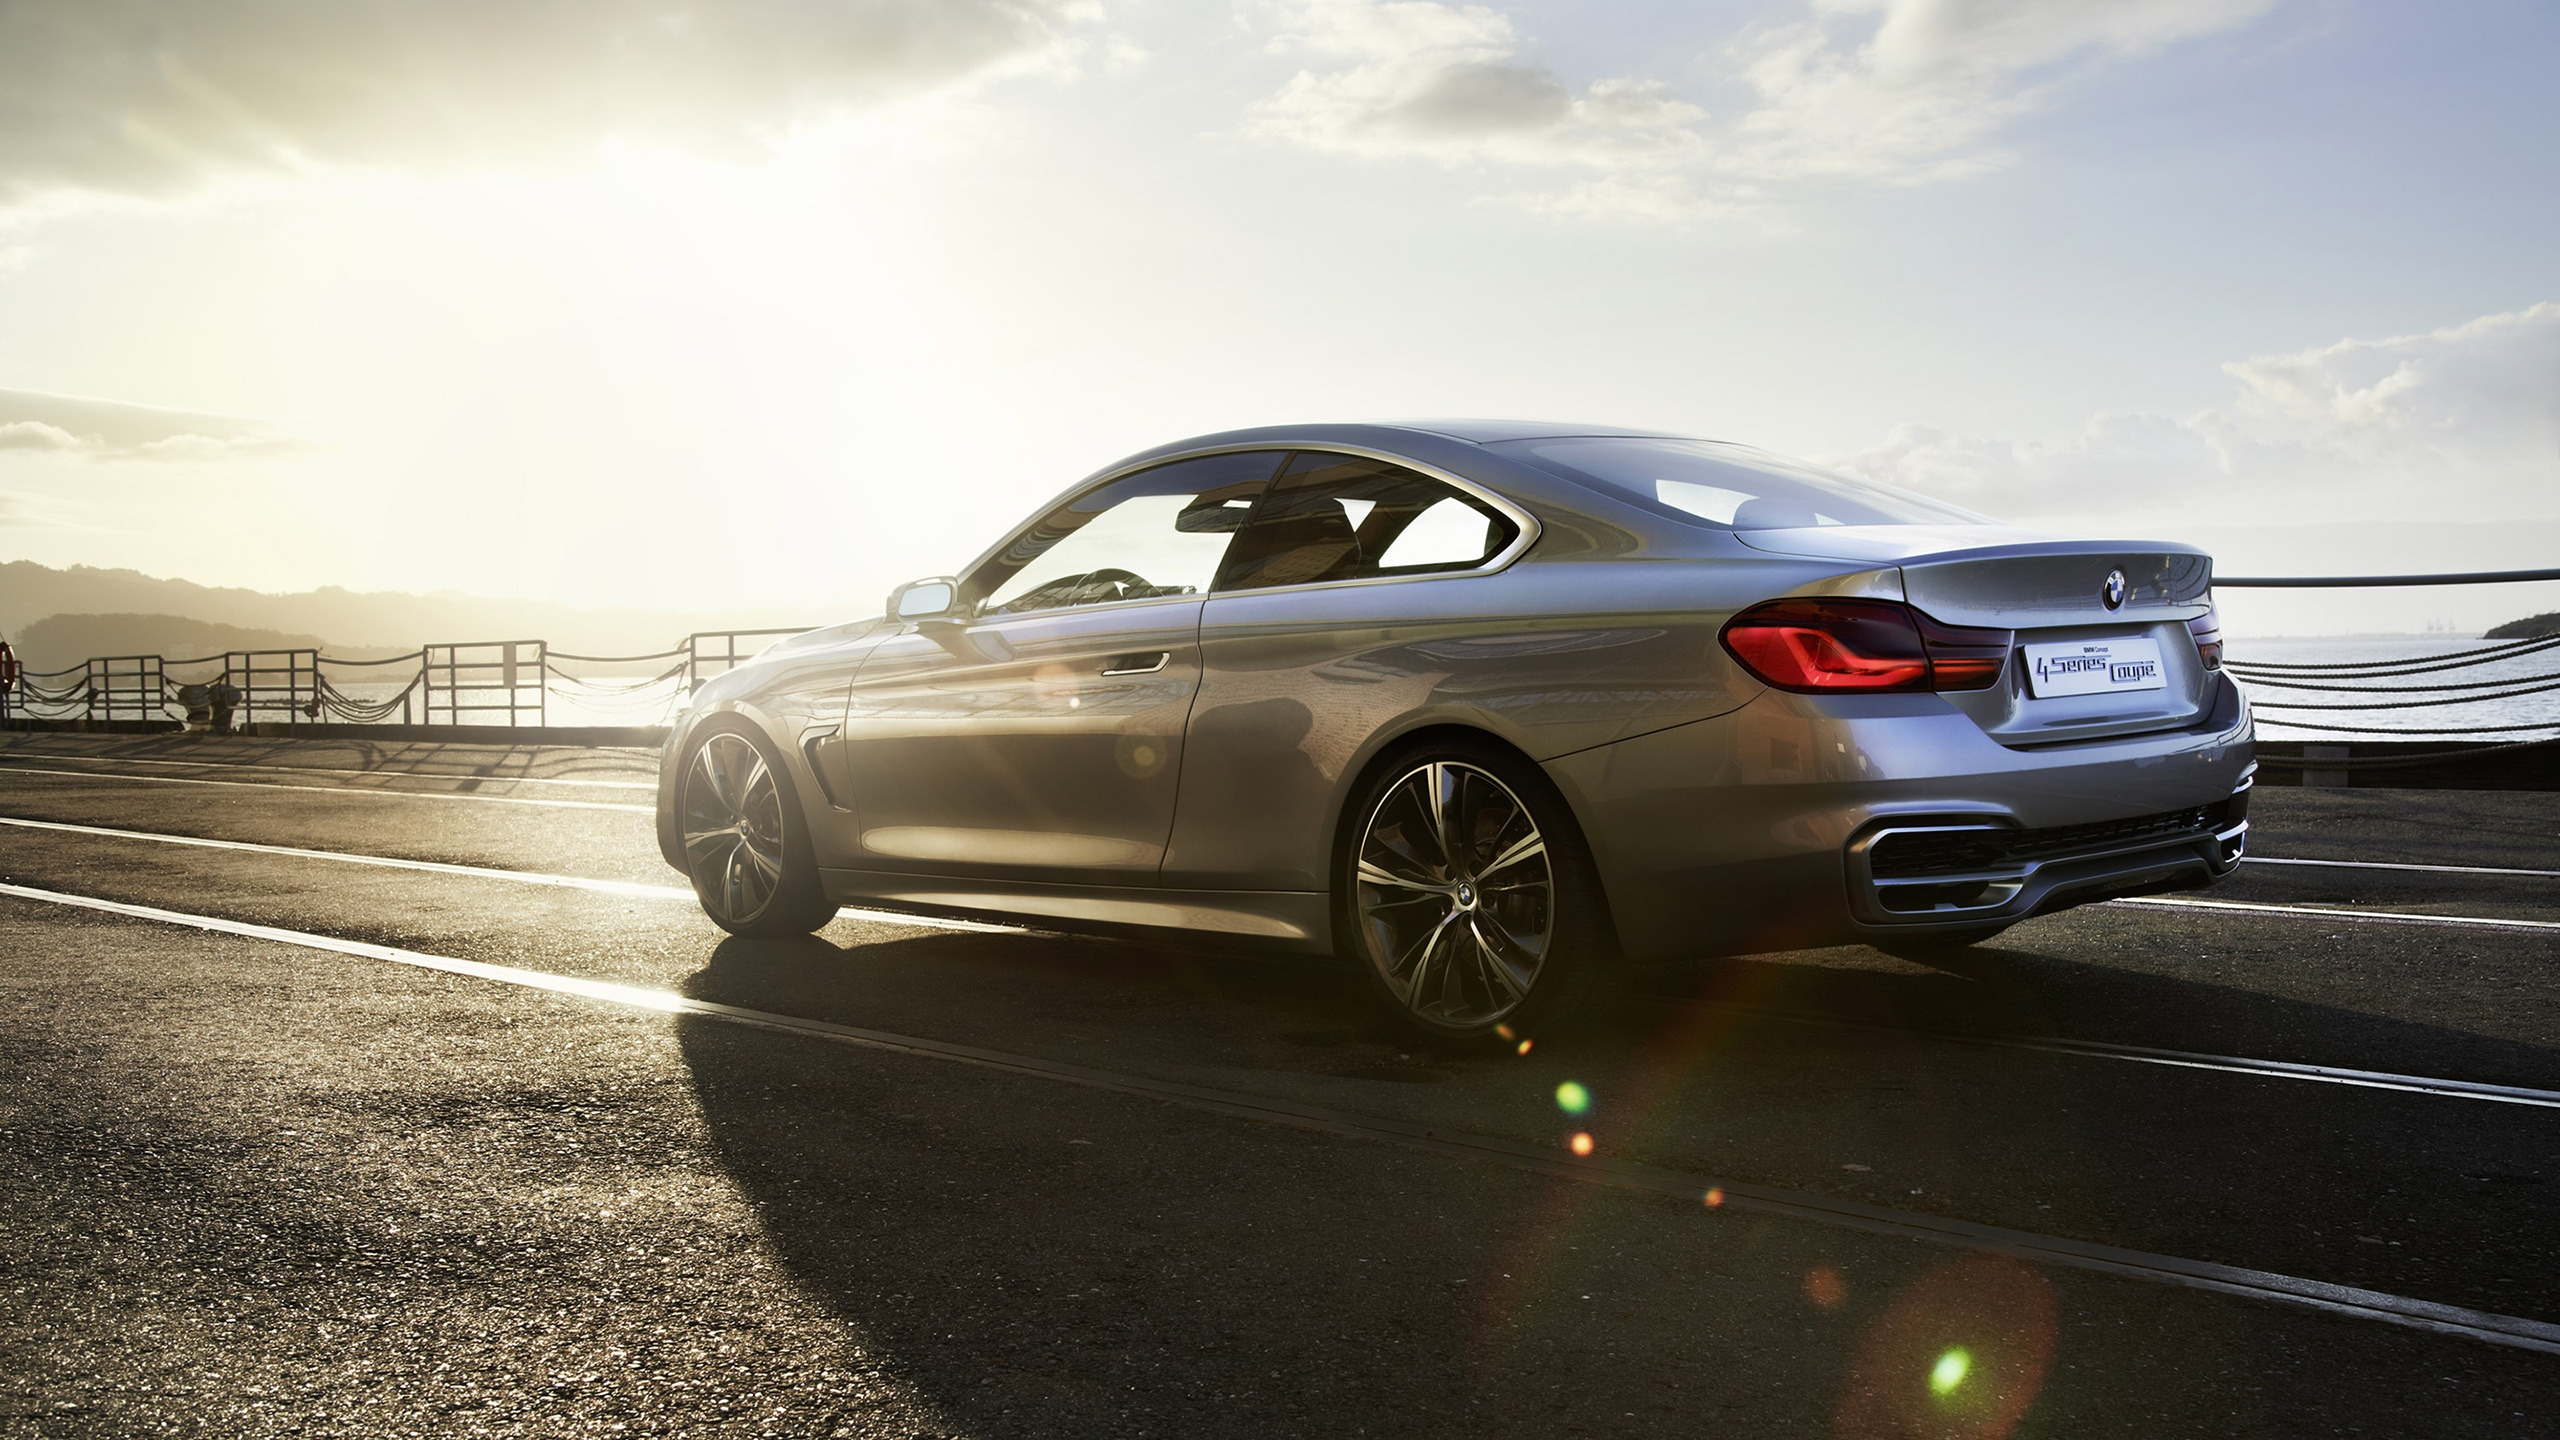 Gorgeous BMW 4 Series for 2560x1440 HDTV resolution